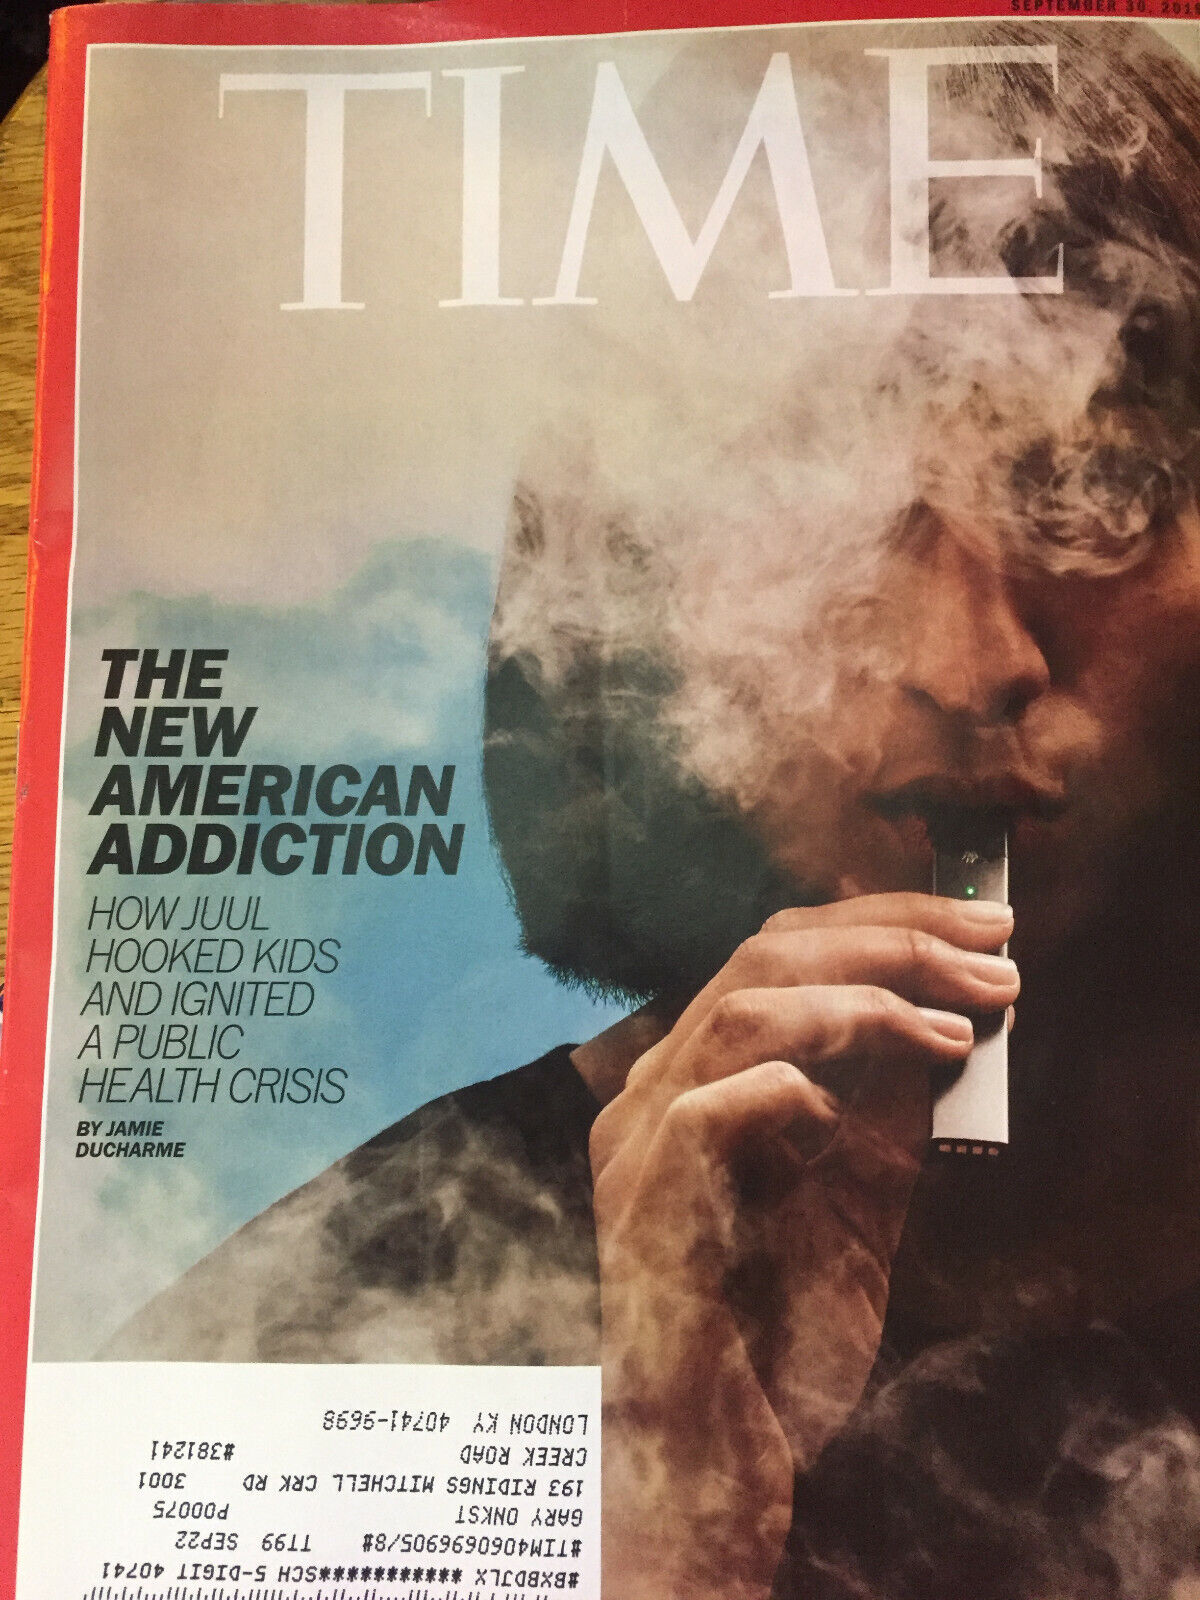 TIME Magazine~JUUL Hooked Kids~ The New American Addiction September 30, 2019